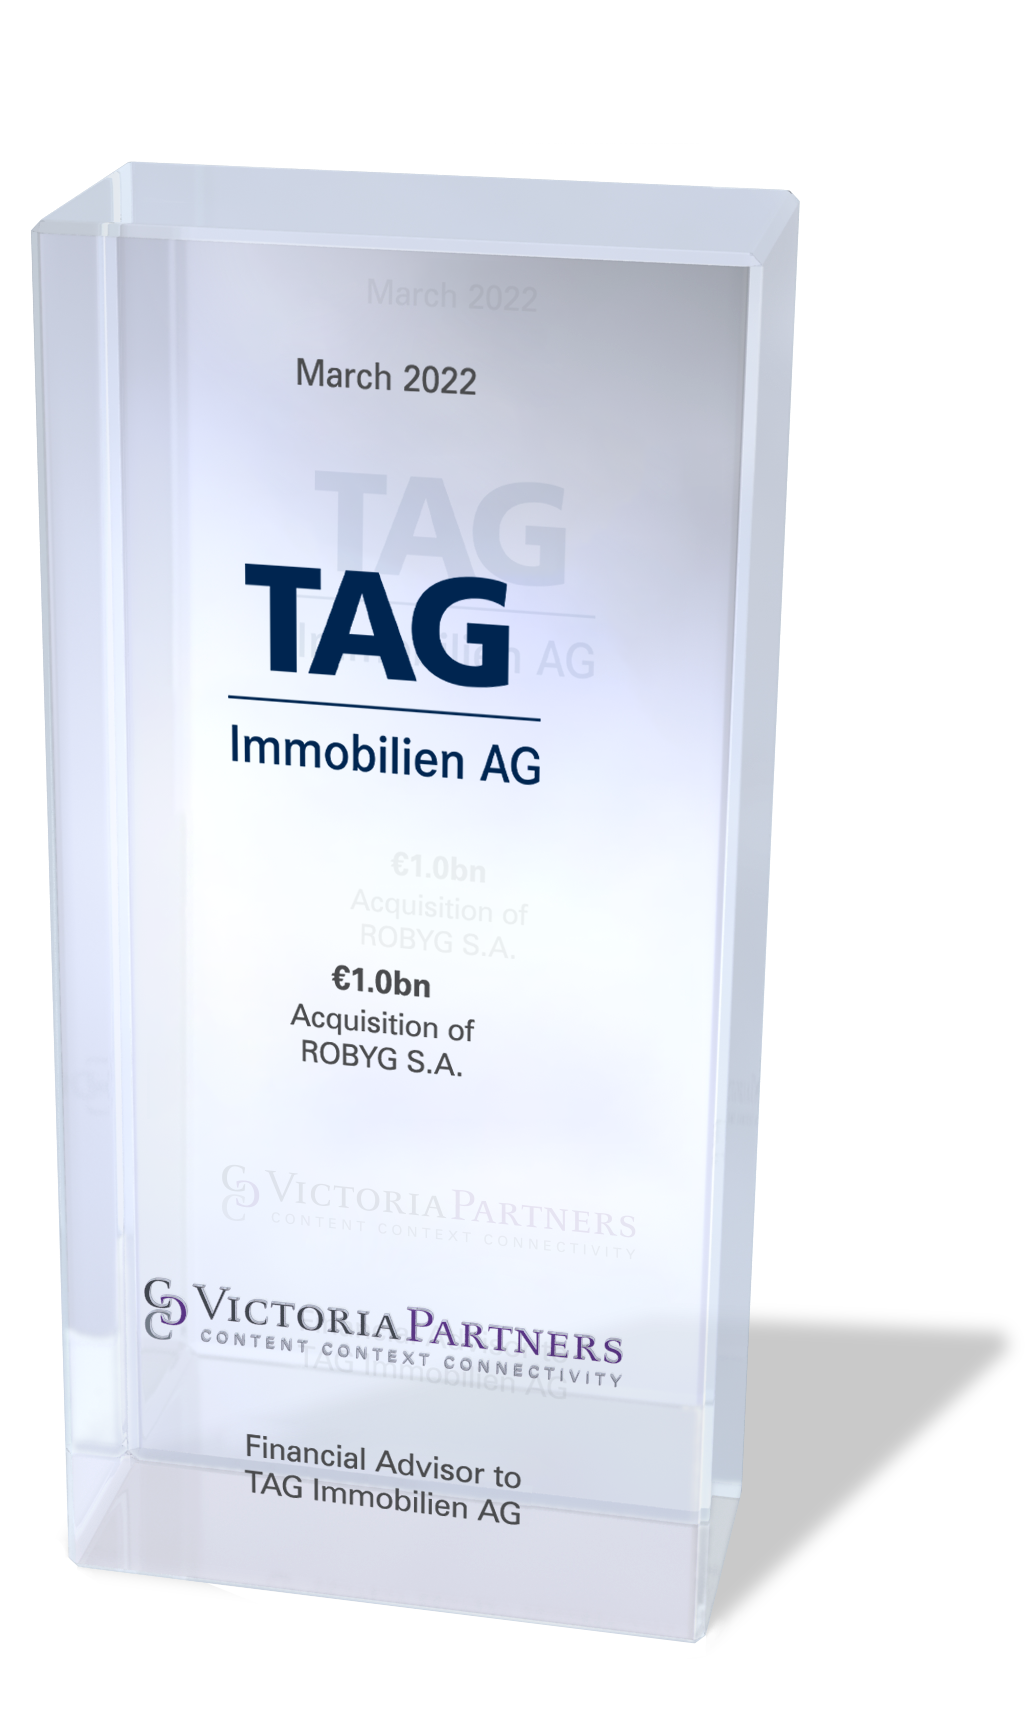 VICTORIAPARTNERS - Financial Advisor to TAG Immobilien AG - March 2022